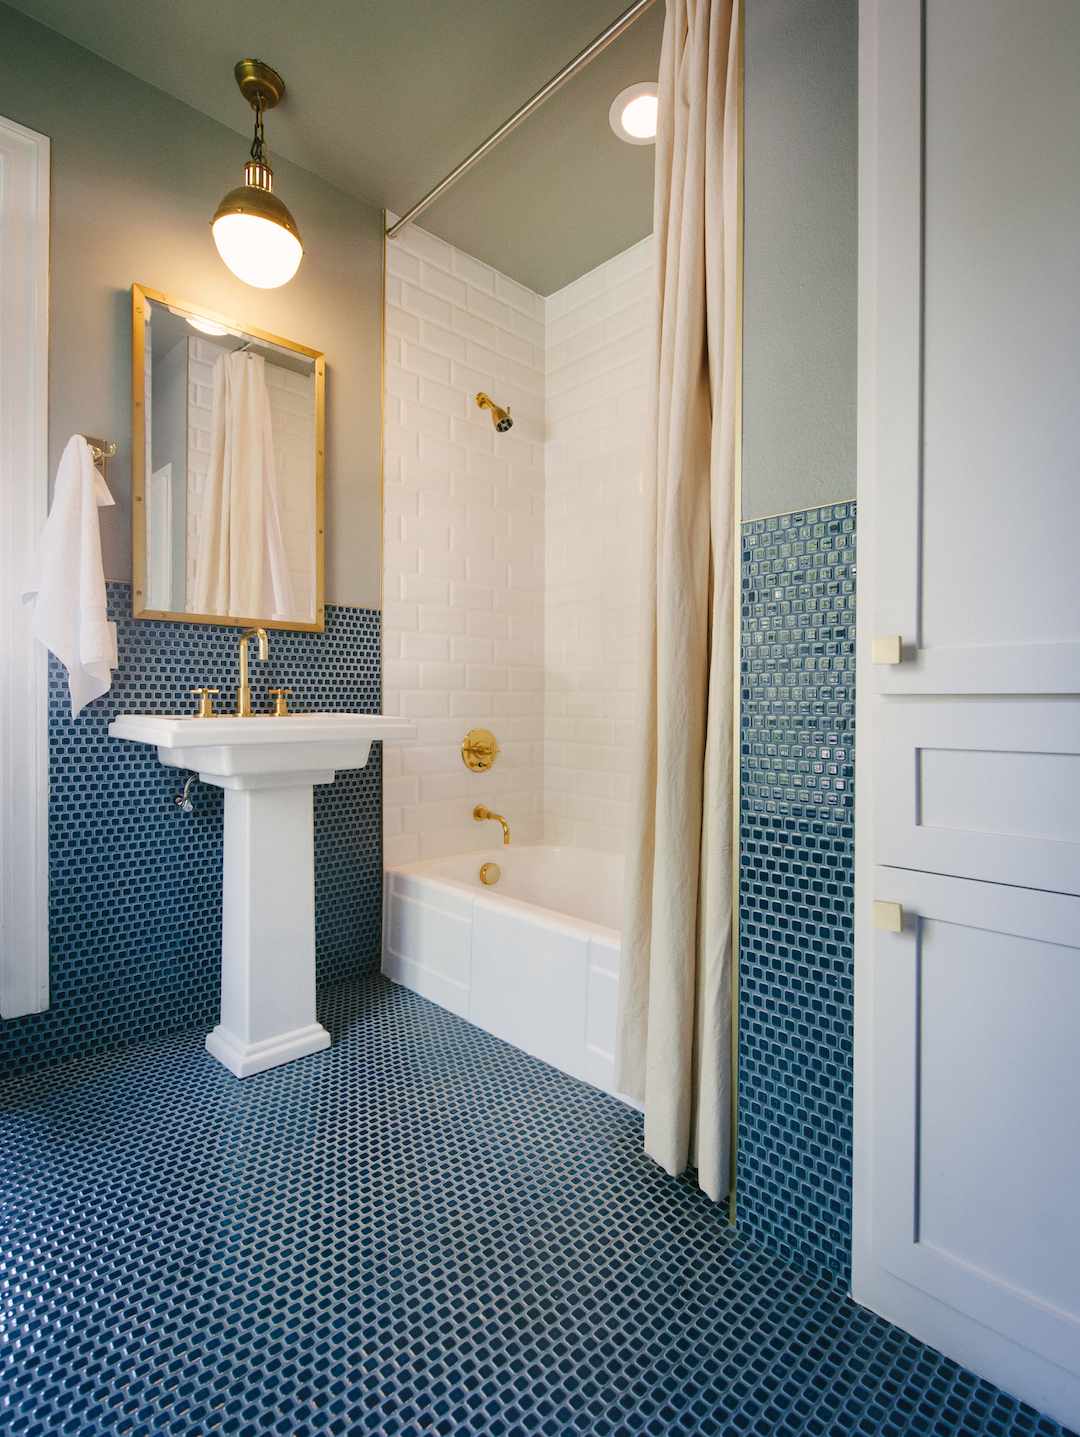 Gold fixtures in blue and green bathroom